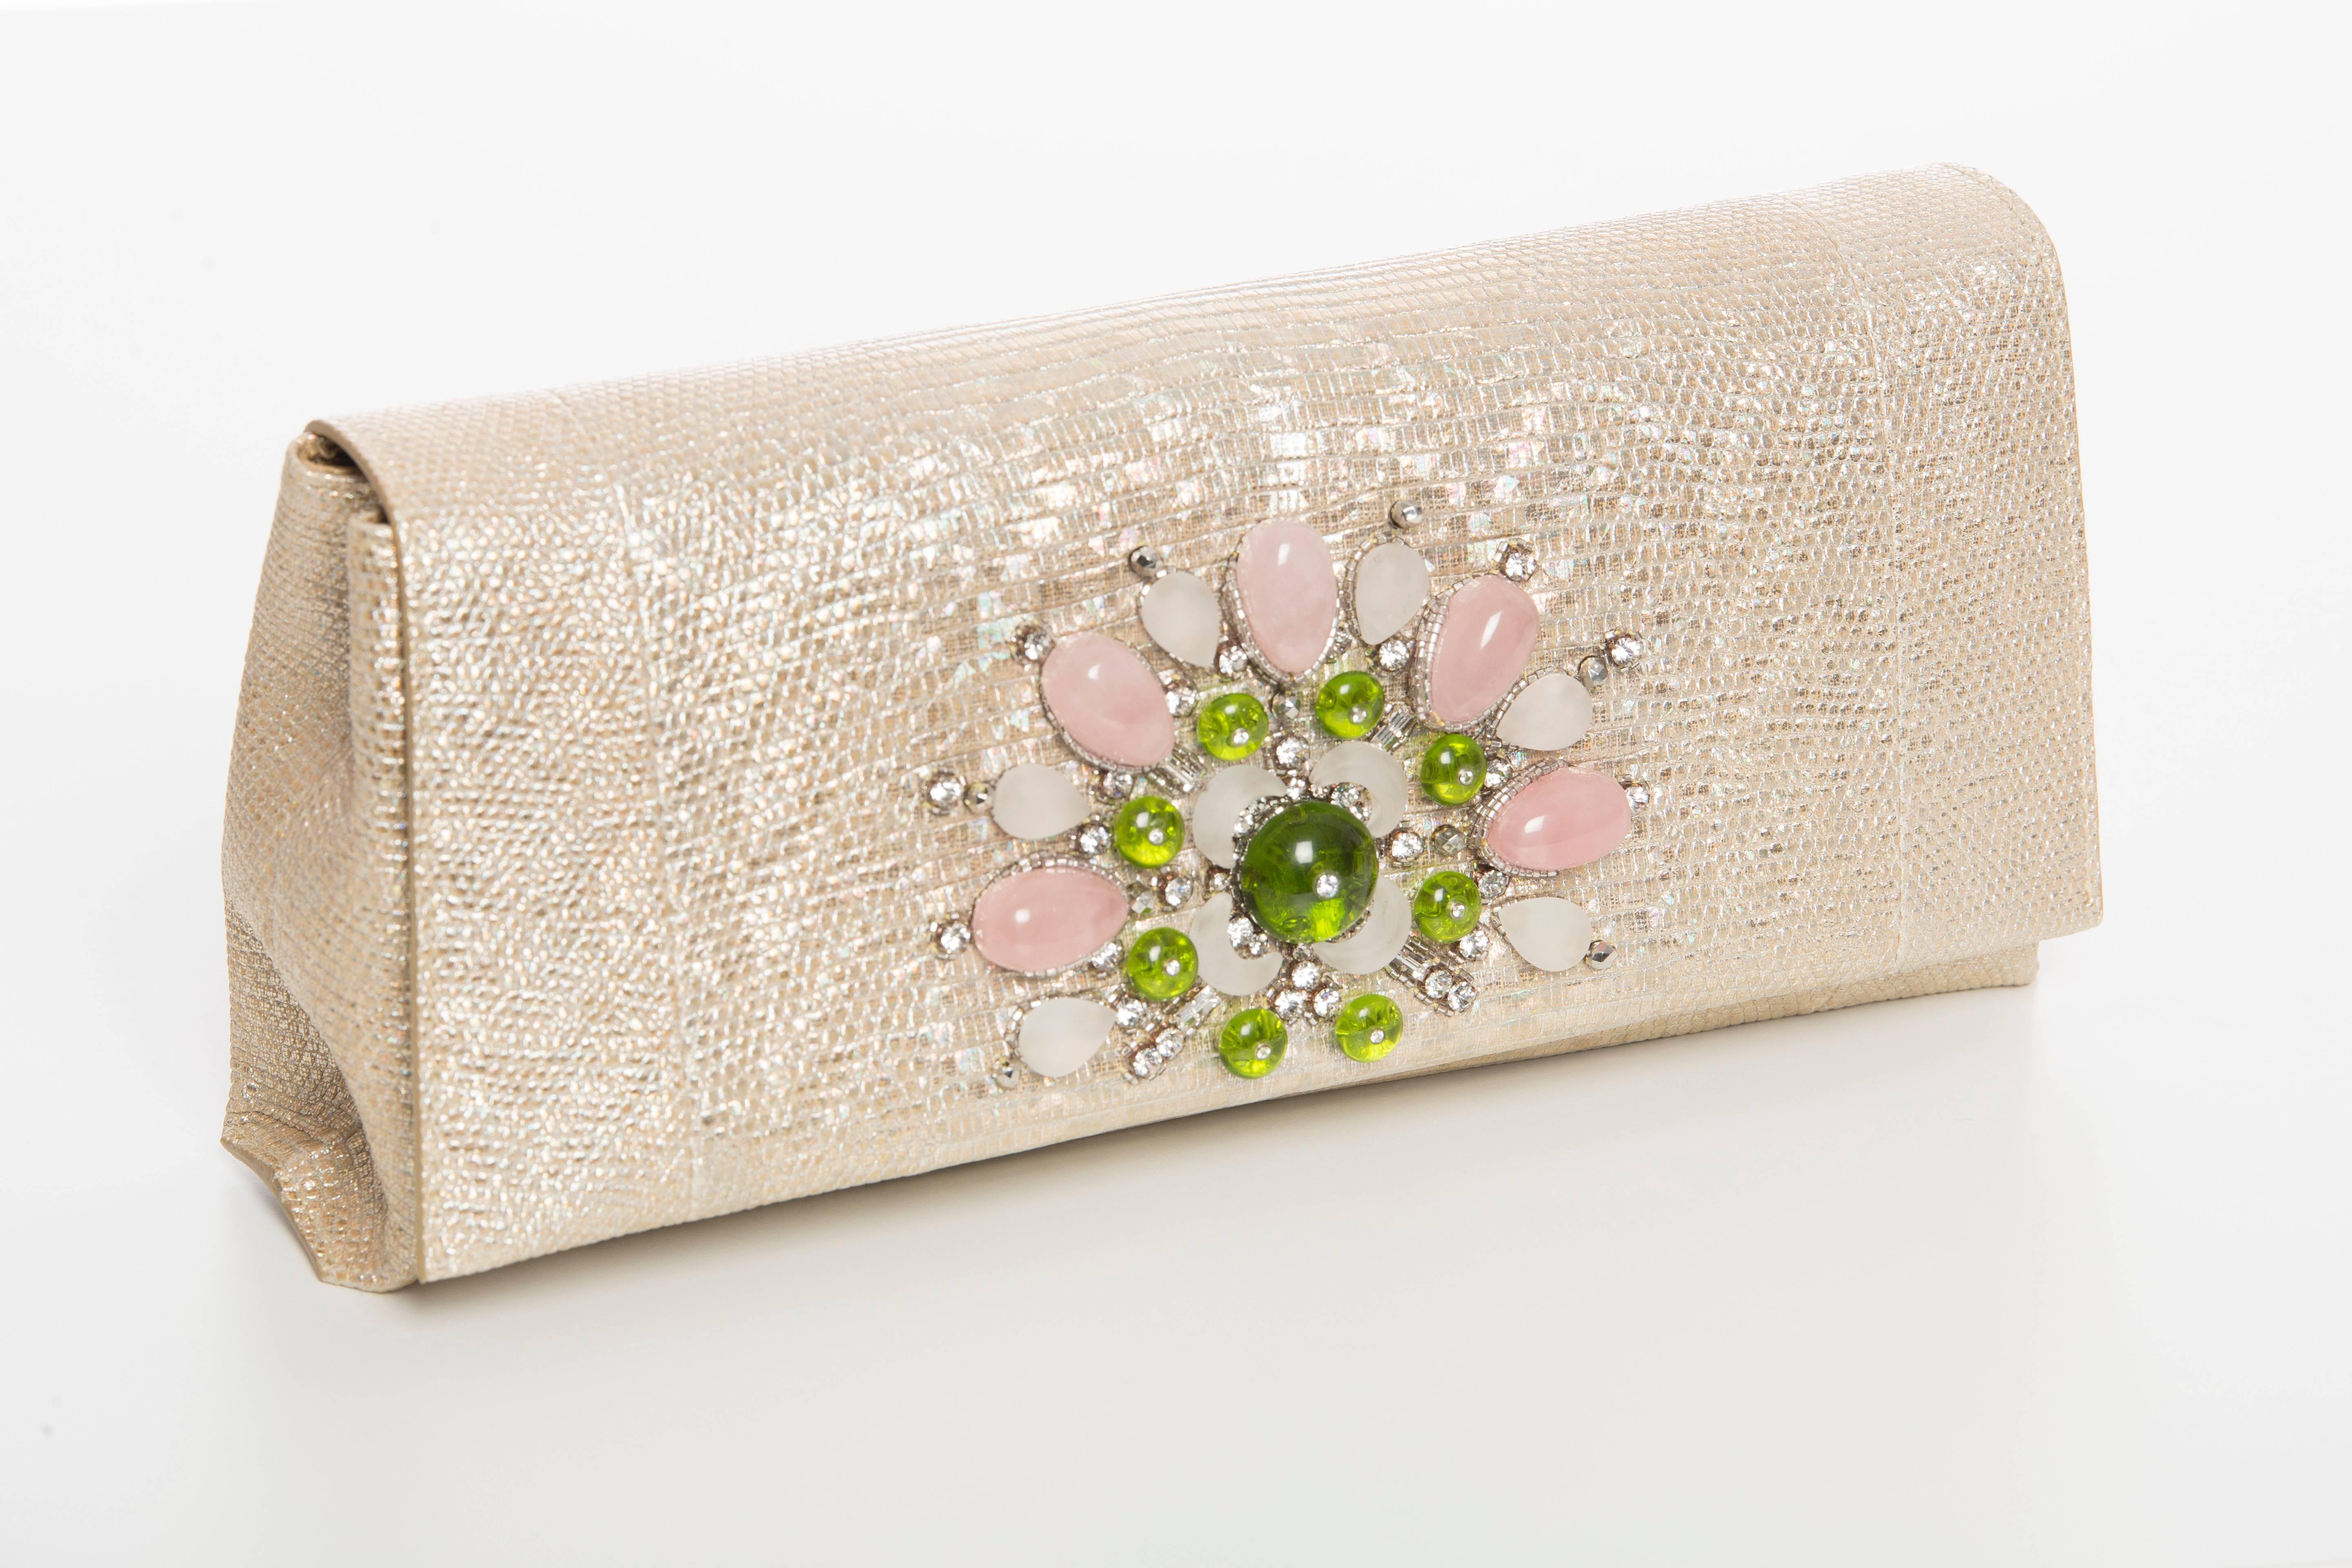 Bvlgari, Spring-Summer 2014, metallic lizard evening clutch with multicolor gem stones at front face, pink satin lining, single pocket at interior wall and snap closure at front flap. Includes dust bag

Retail: $5000.00

Height 5”, Width 10.5”,